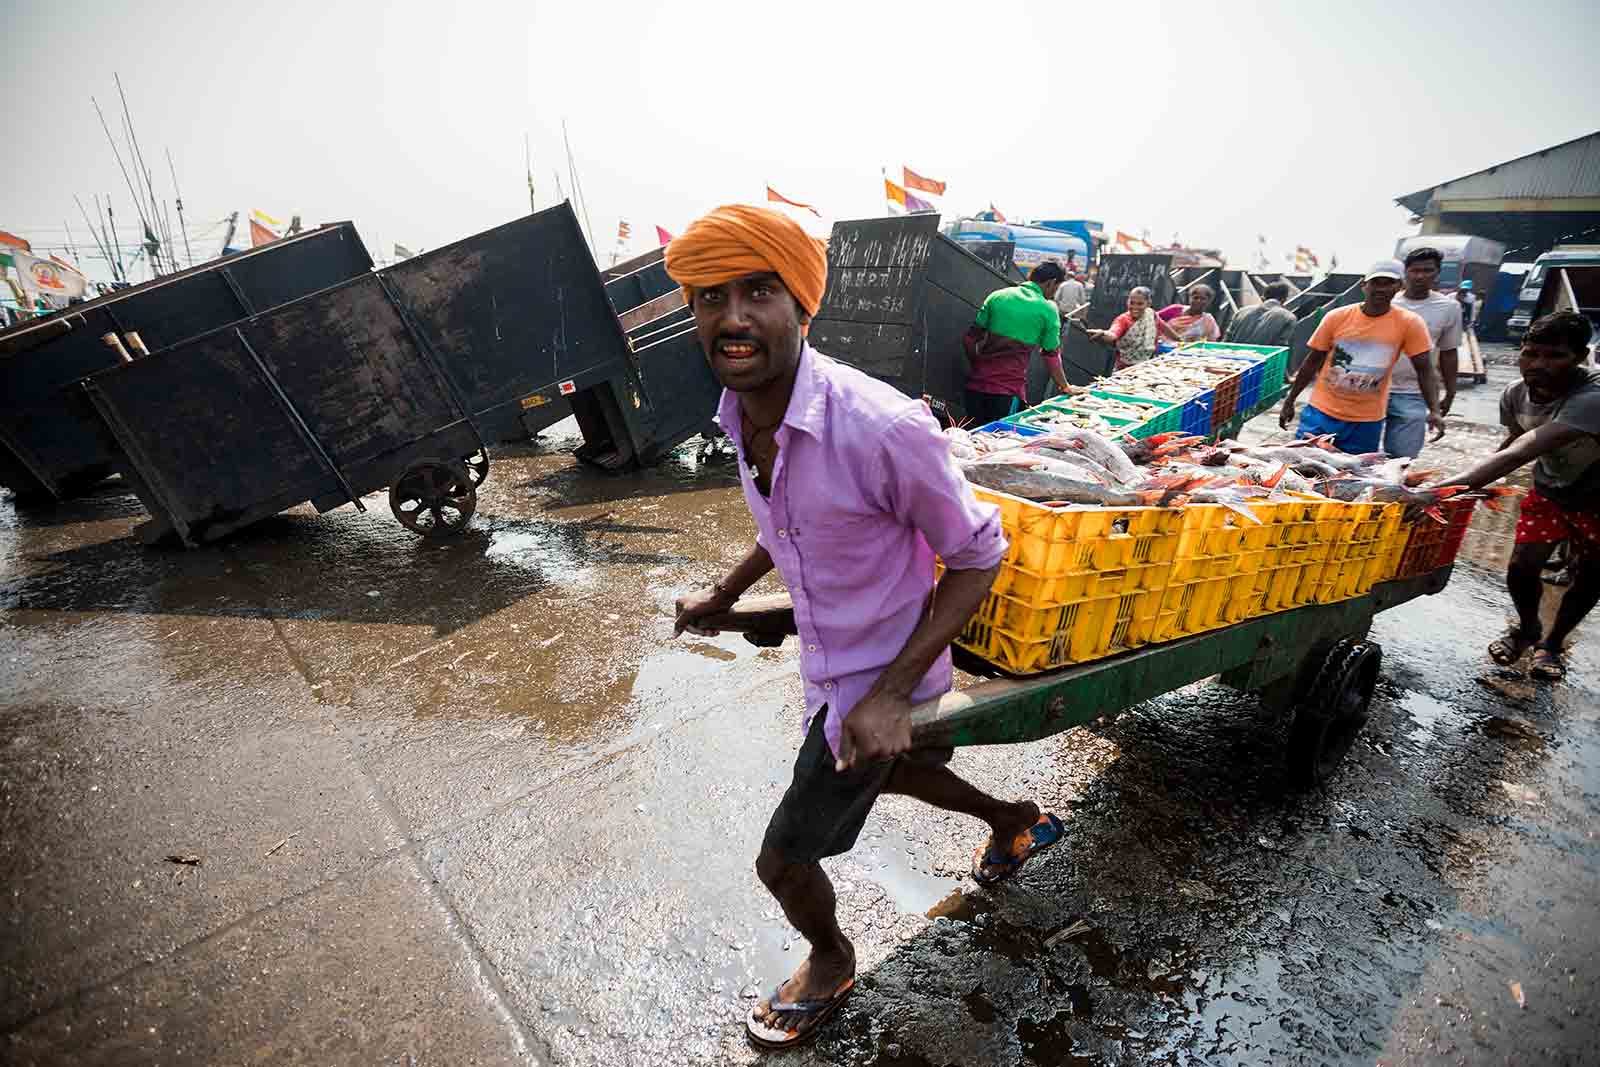 Men push loaded handcarts through the crowds at Sassoon Docks as they yell for people to get out of the way.